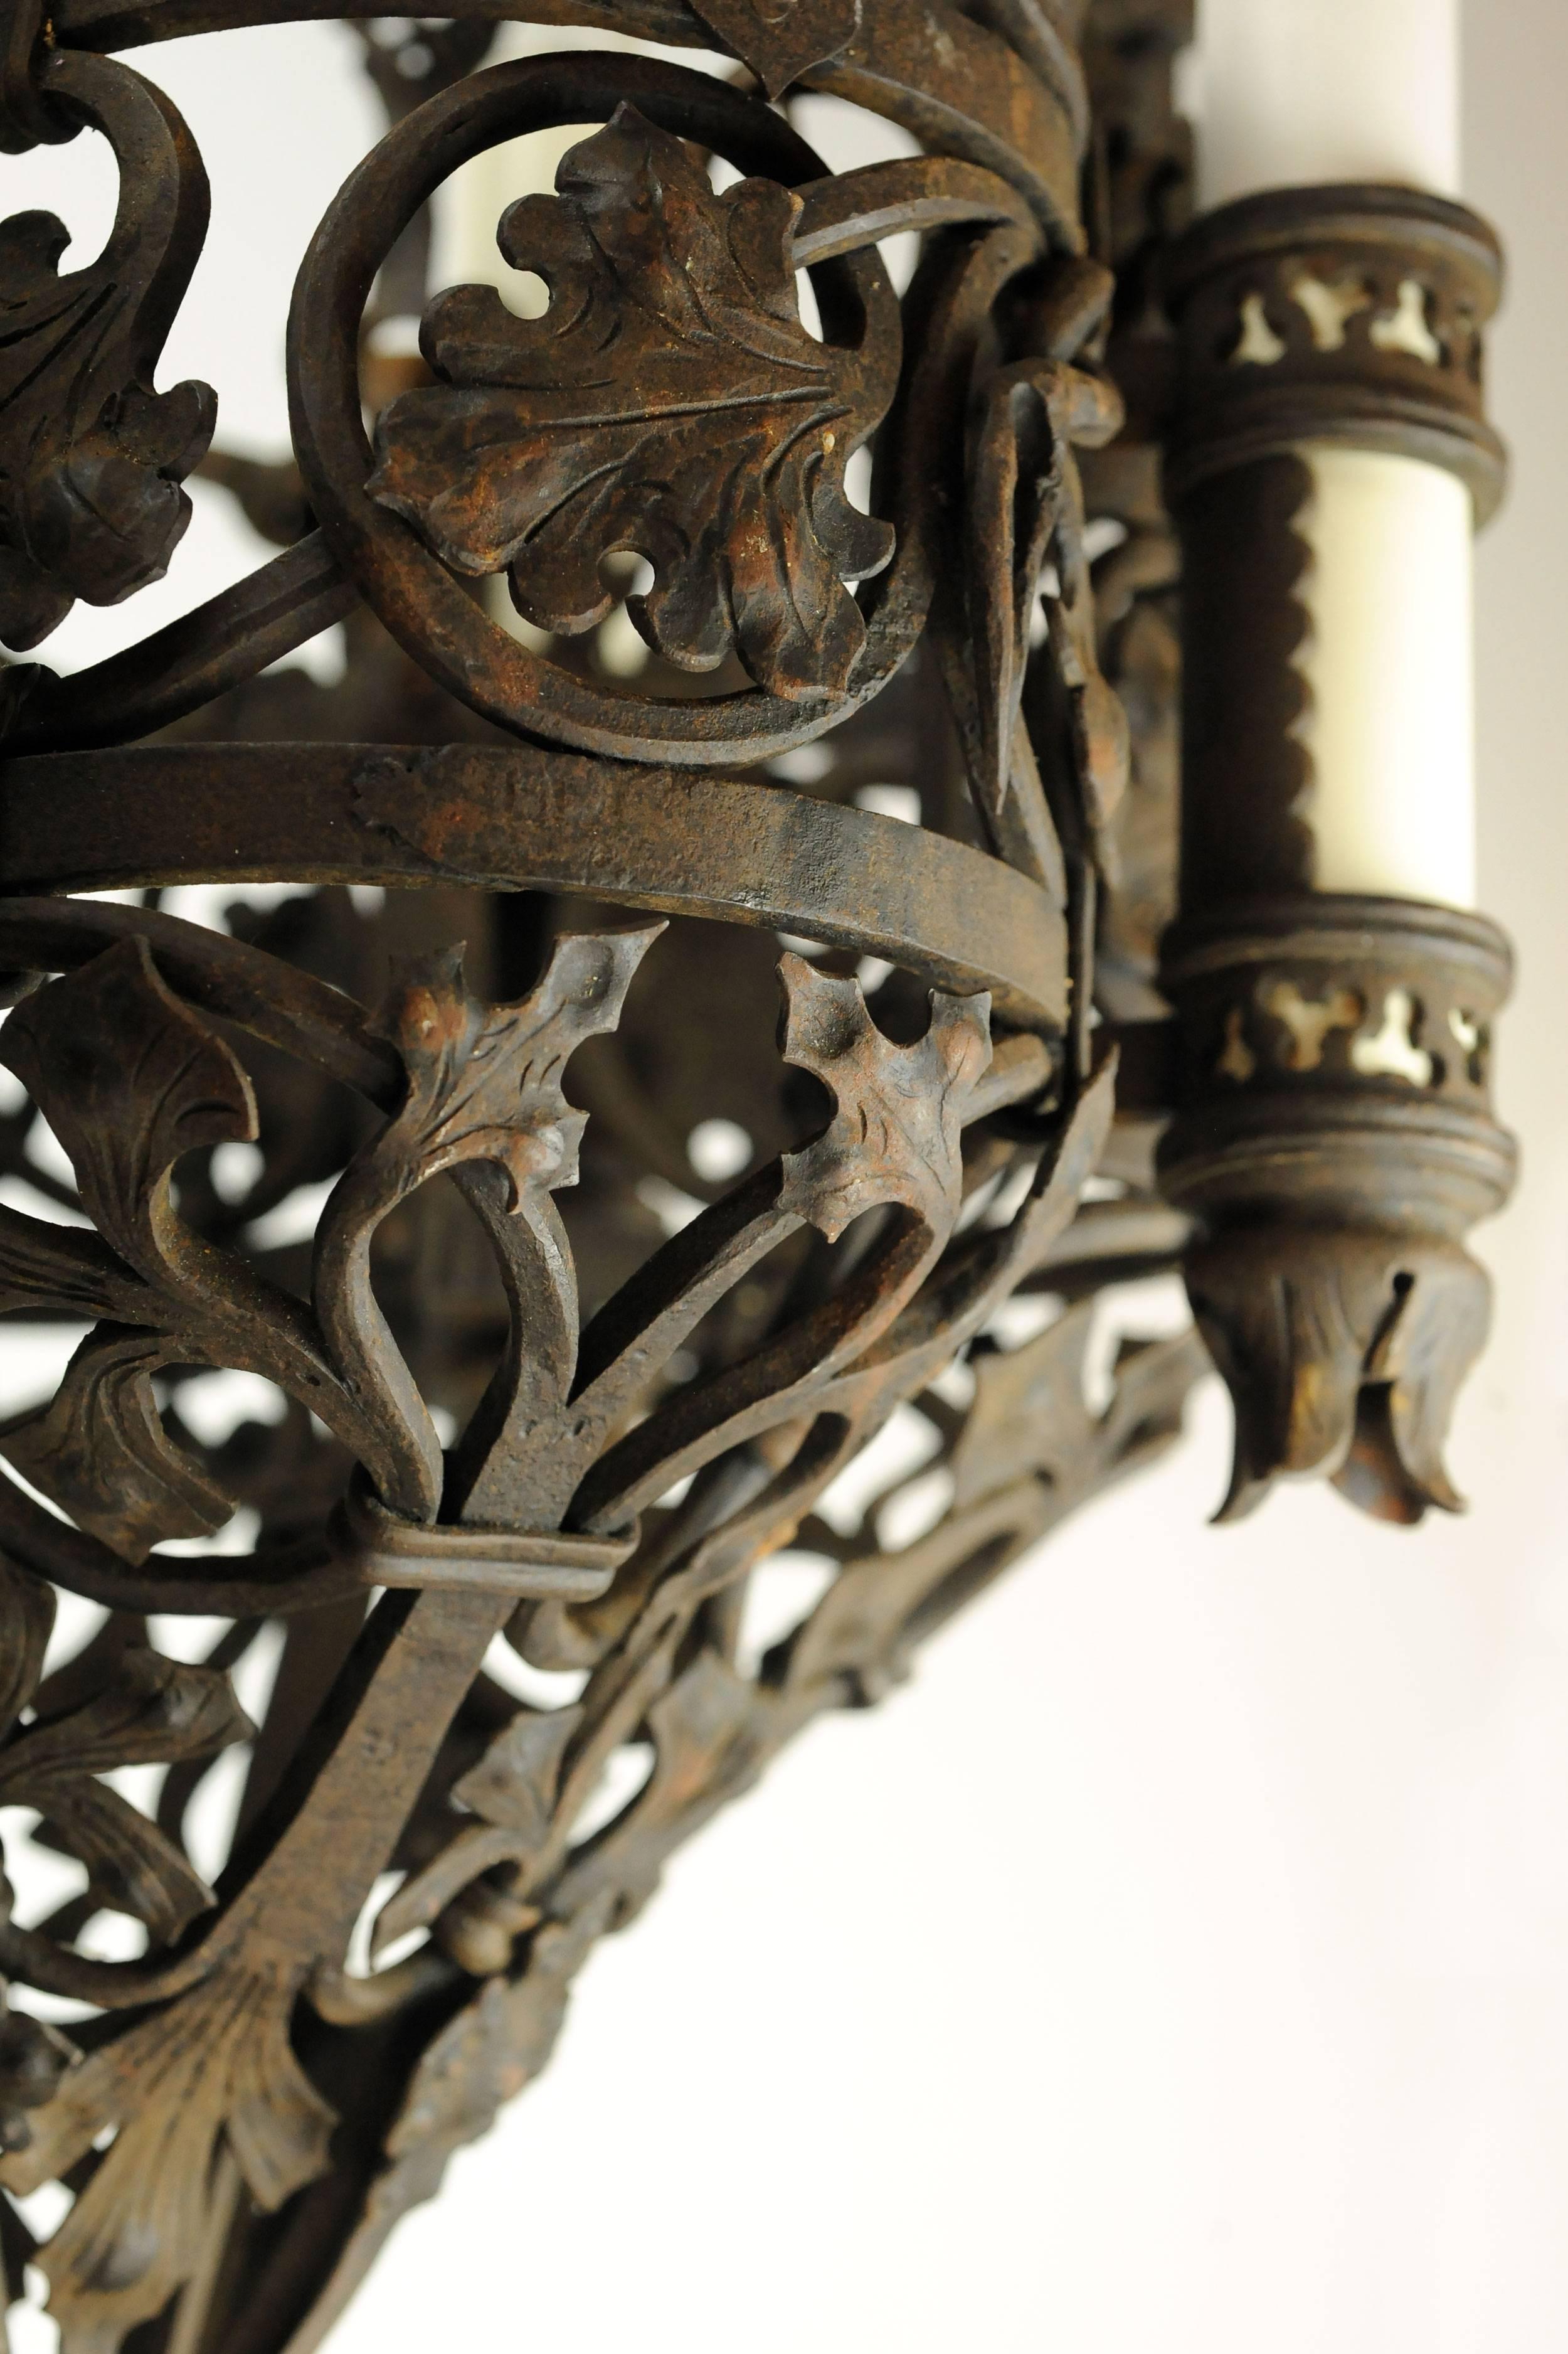 This wrought iron Tudor chandelier is truly a feast for the eyes. Leaves of varying shapes and sizes wraparound the fixture, giving it an organic, earthy feel, accentuated by thick strands of twisting, coiled iron. The four candle covers sit atop